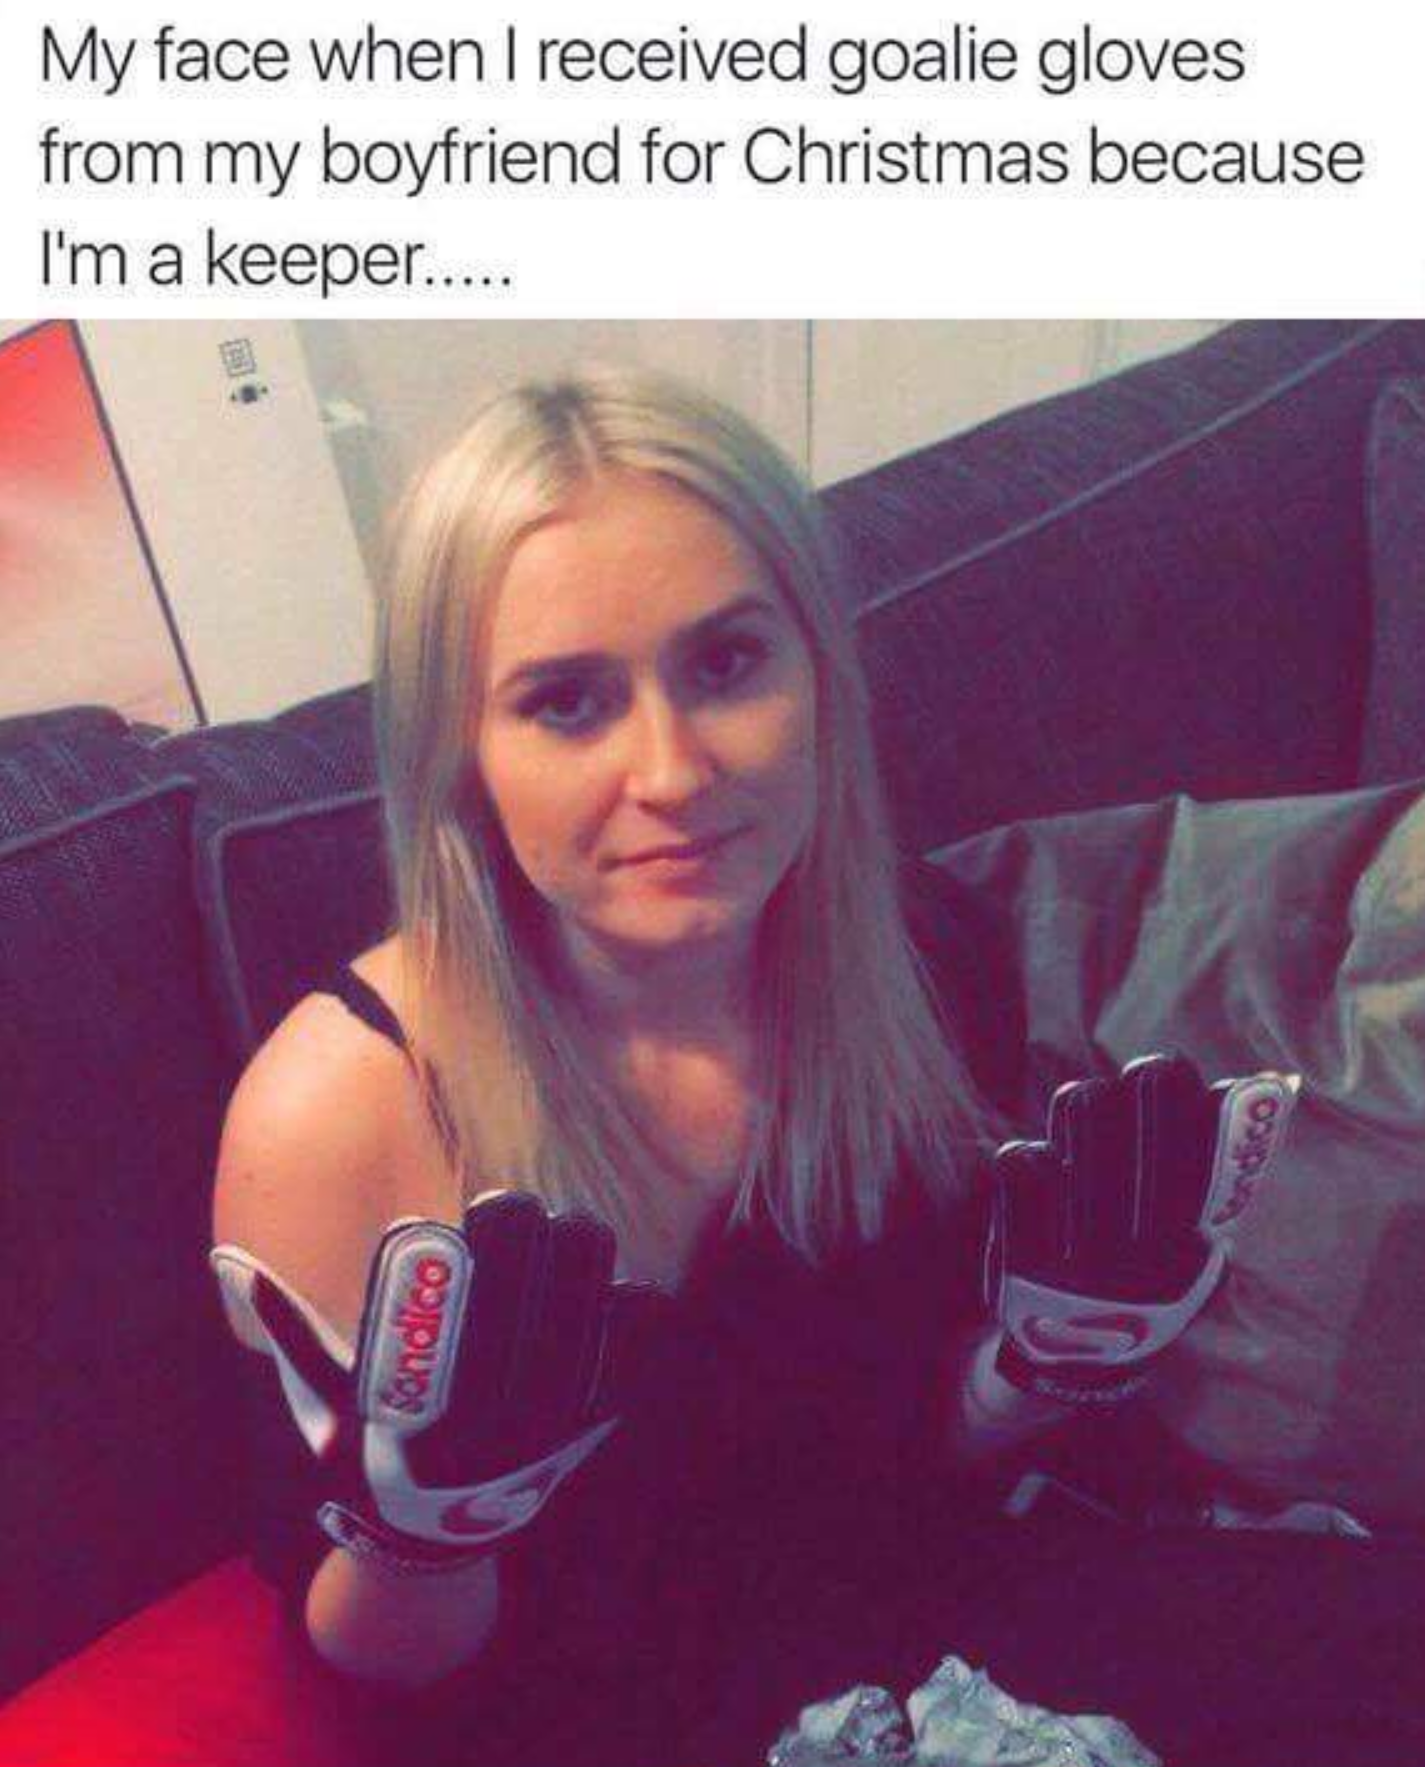 she's a keeper - My face when I received goalie gloves from my boyfriend for Christmas because I'm a keeper.....